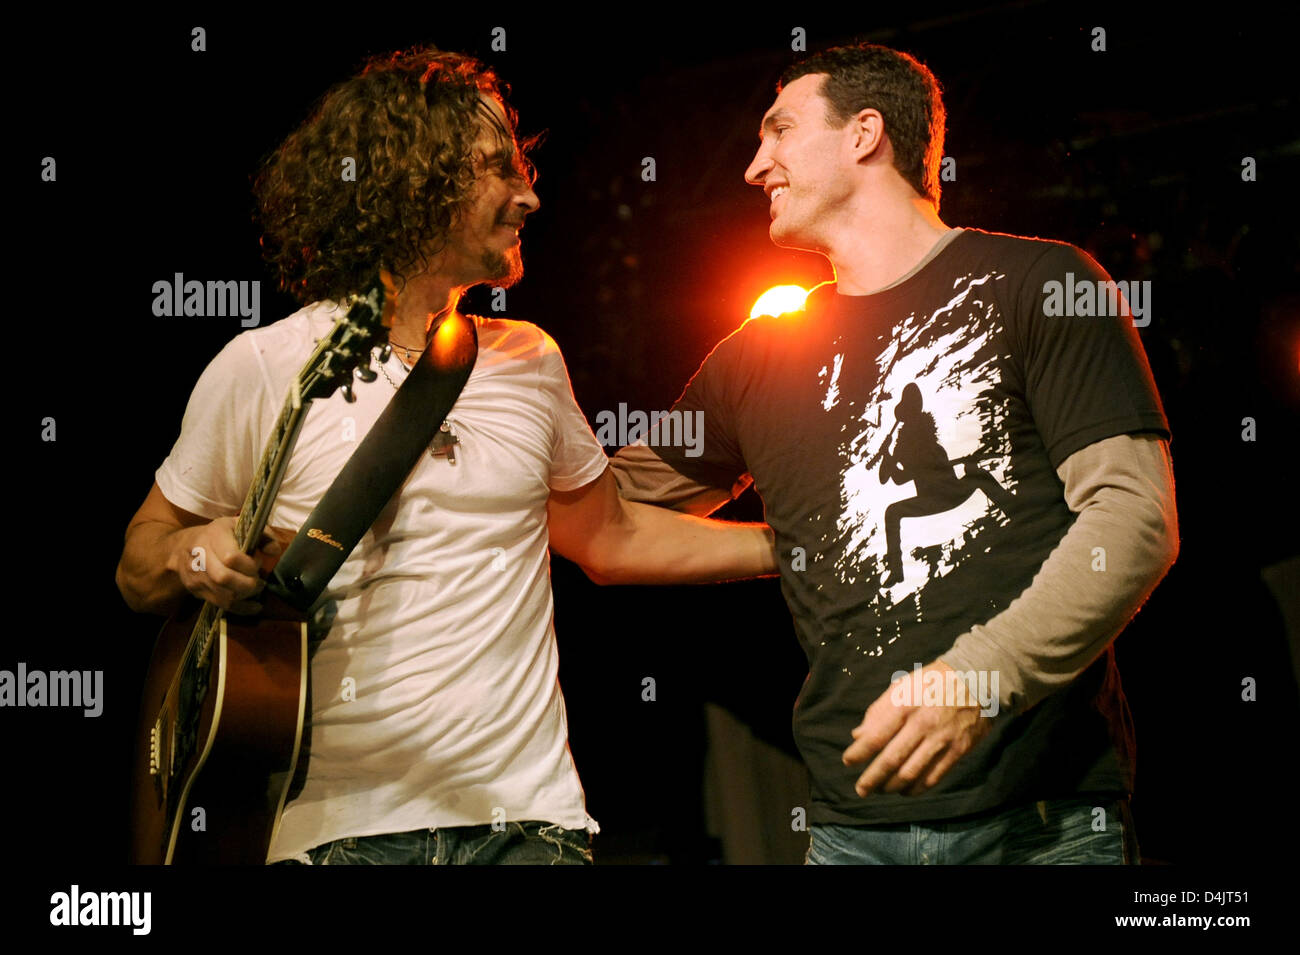 Boxer Vladimir Klitschko (R) and singer Chris Cornell seen together on stage at the ?Columbia Club? in Berlin, Germany, 27 February 2009. As singer and guitarist of several bands such as ?Soundgarden?, ?Audioslave? and ?Temple Of The Dog?, Cornell sold over 20 million albums worldwide and won several Grammy Awards. His new album ?Scream? will be released on 06 March 2009. Klitschko Stock Photo